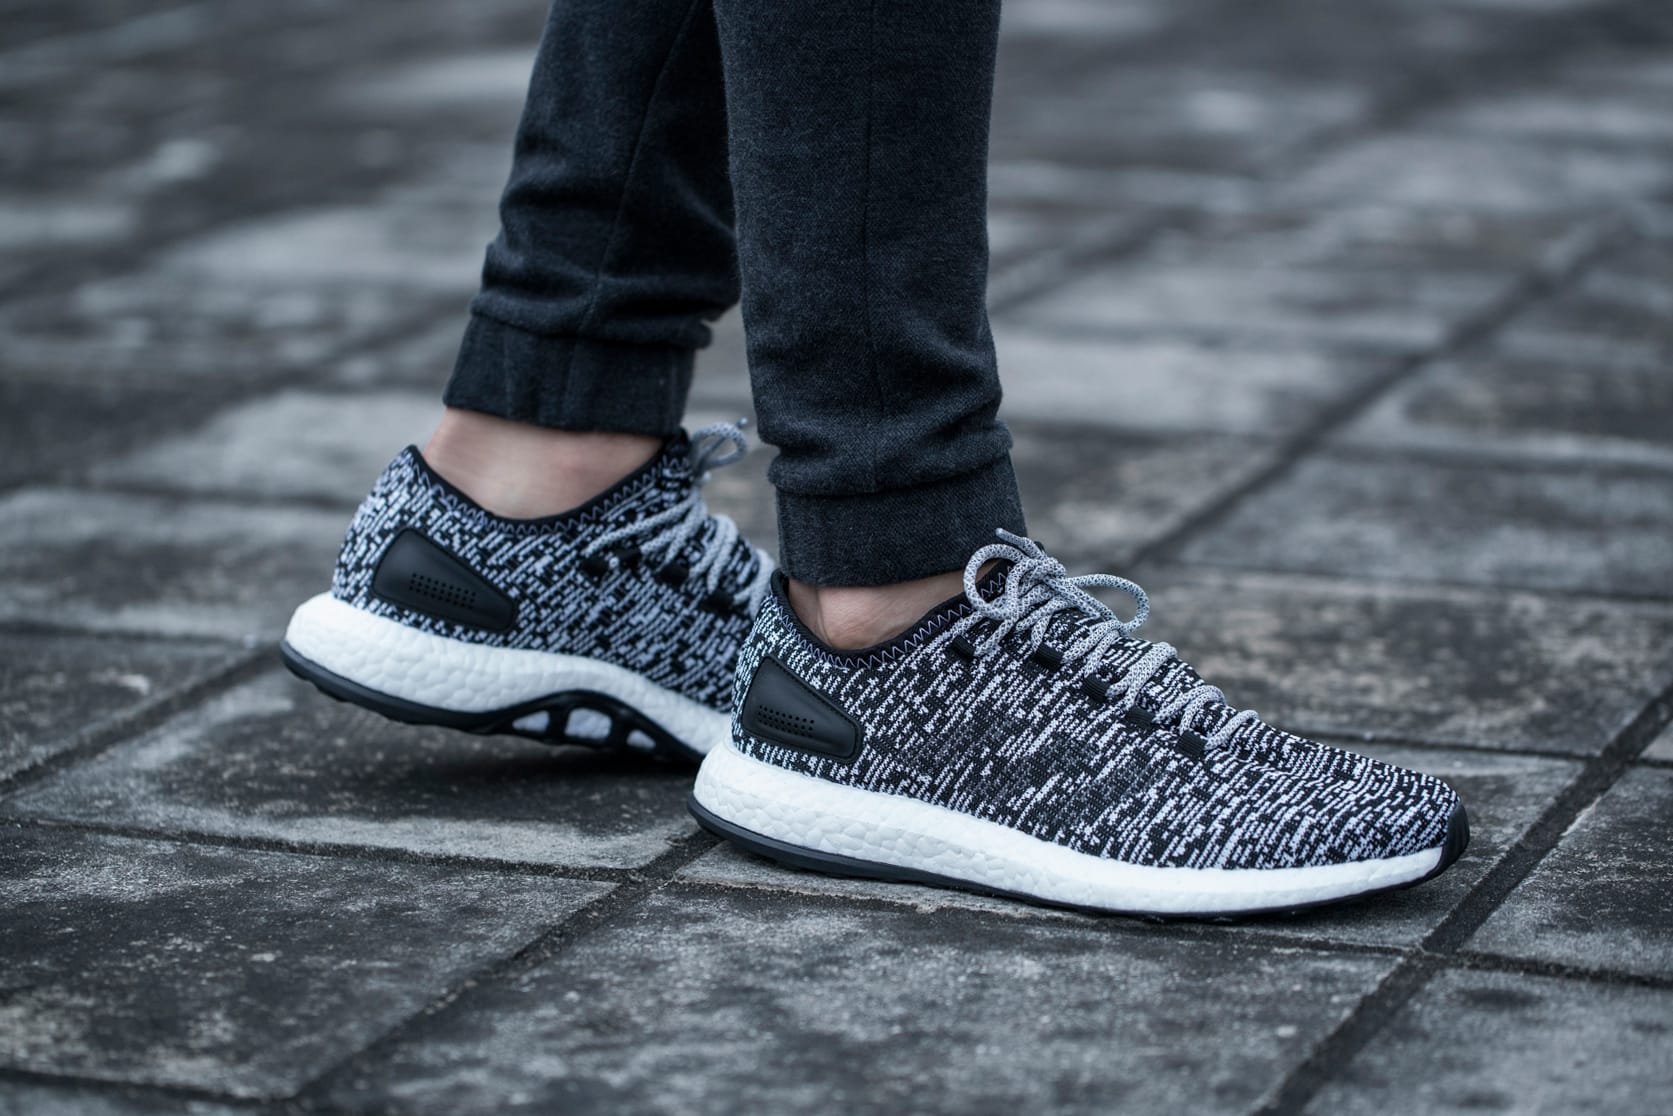 What Makes the New PureBOOST Different From Other BOOST Models 